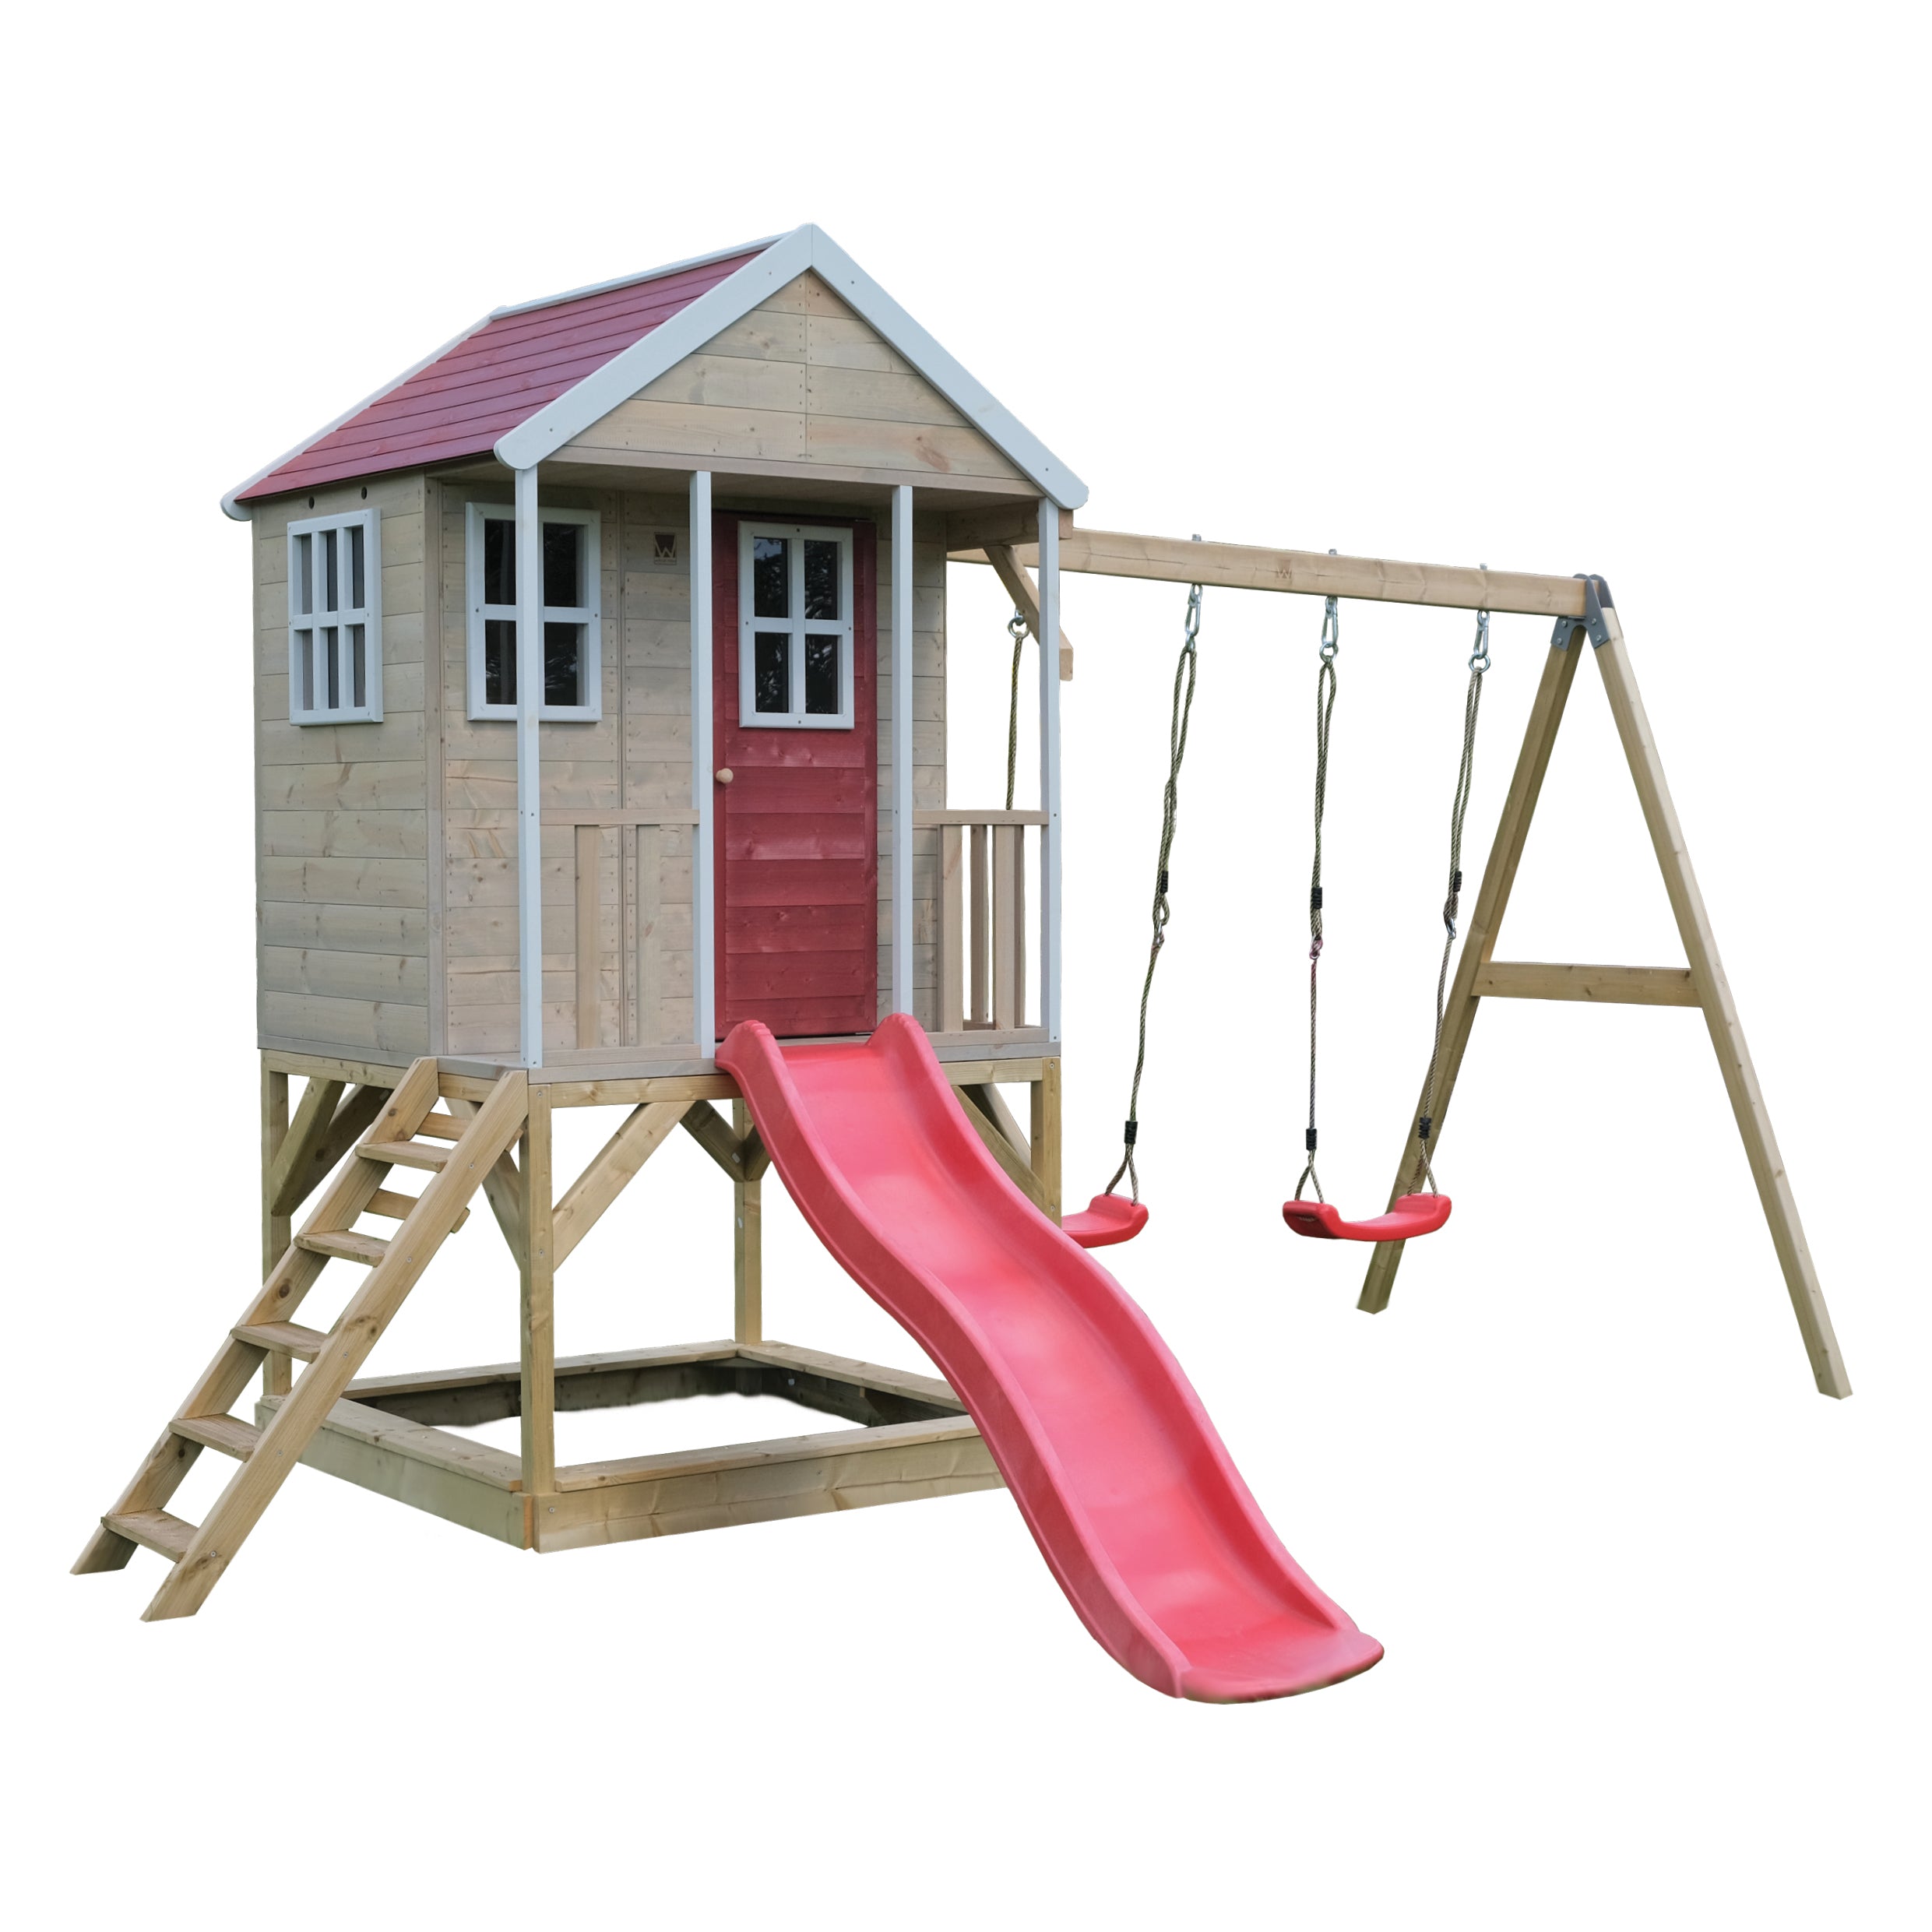 M30R Nordic Adventure House with Platform, Slide and Double Swing